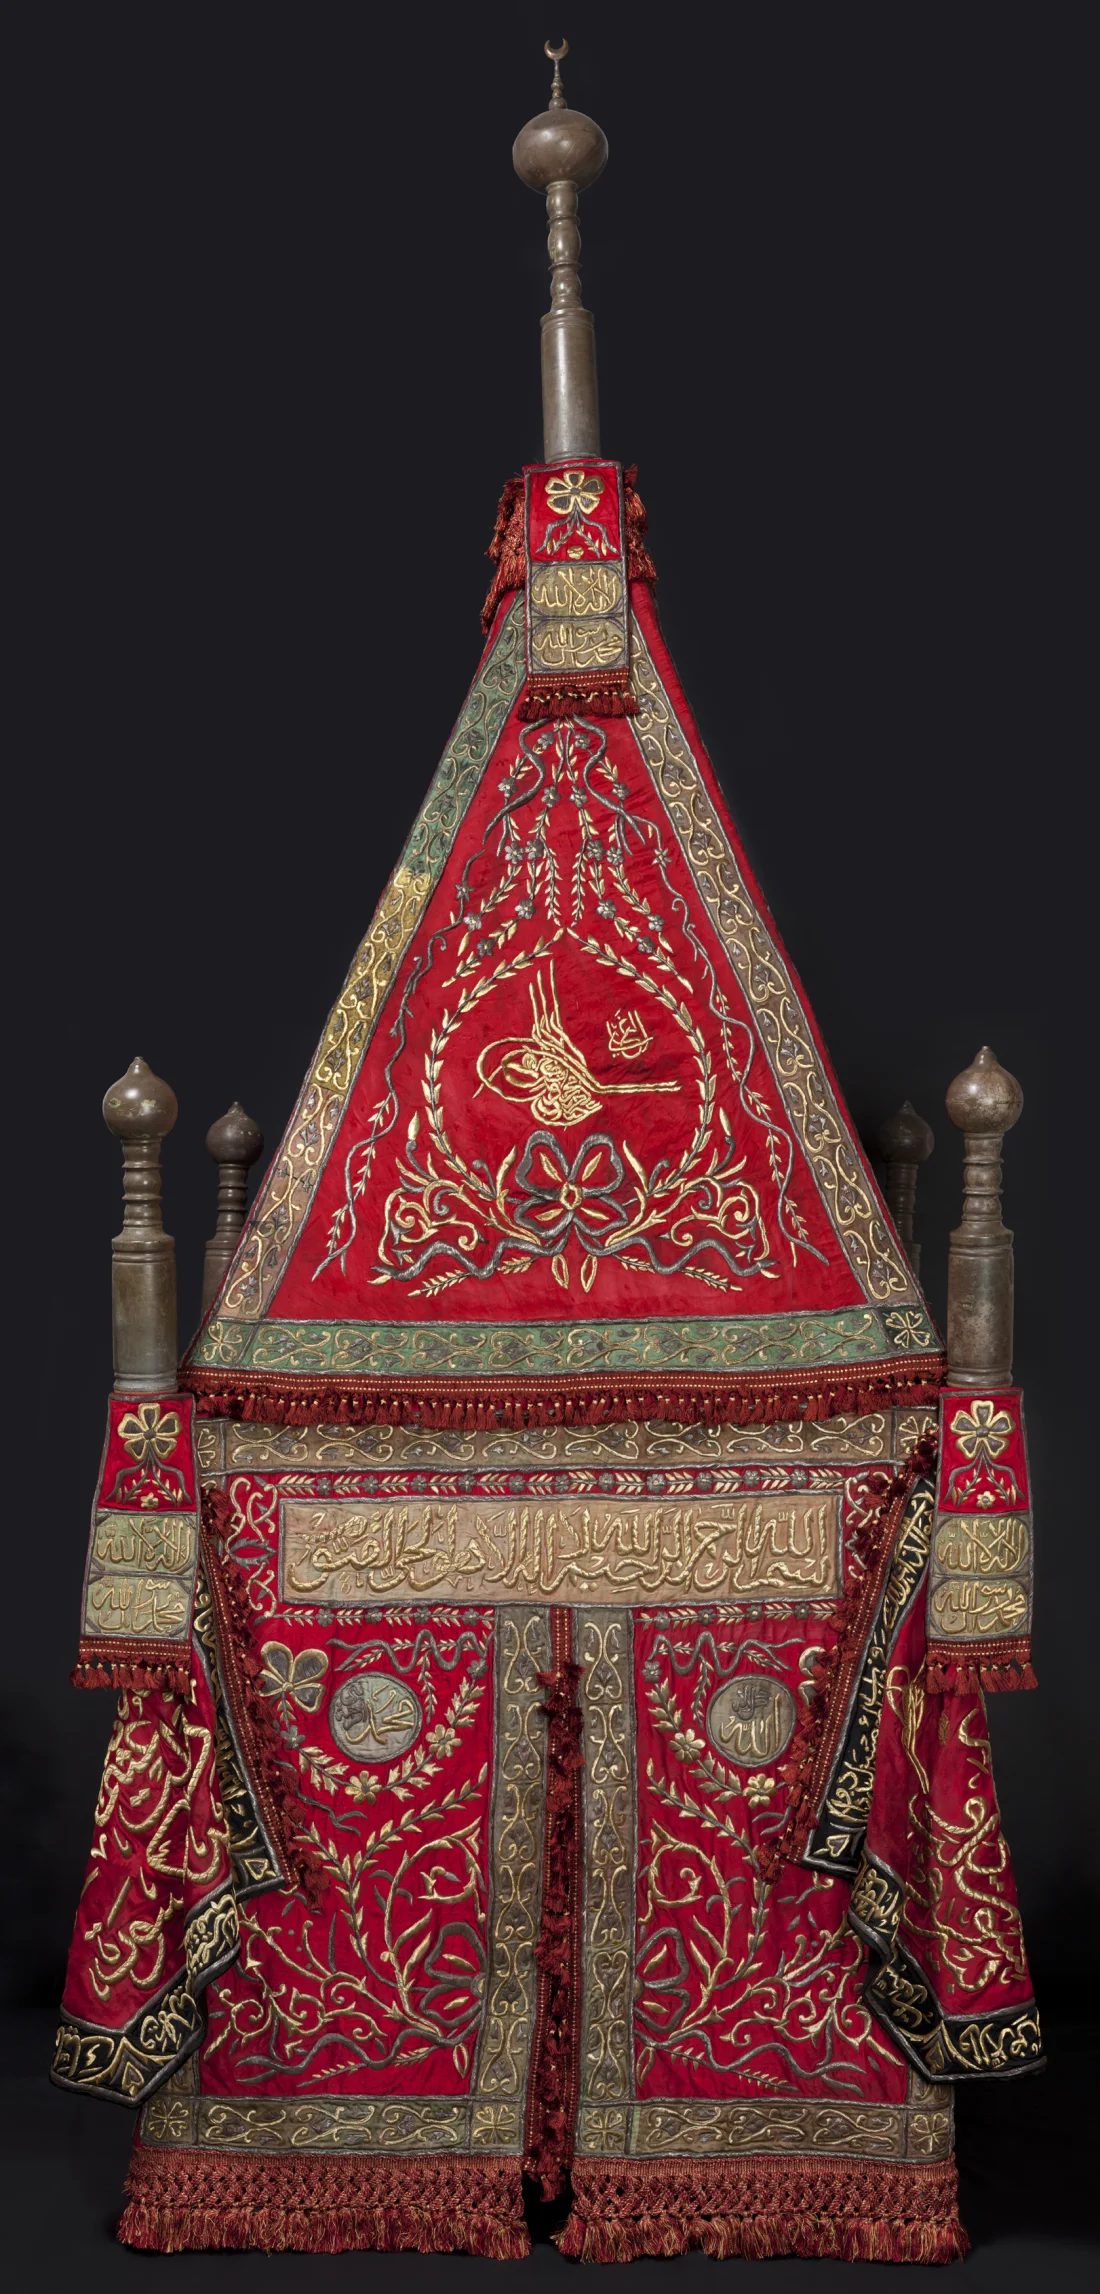 banners and finial banners of red silk, with green and gold-coloured silk appliqués, embroidered in silver and silver-gilt wire over cotton thread padding; finials of copper alloy; contemporary wooden frame